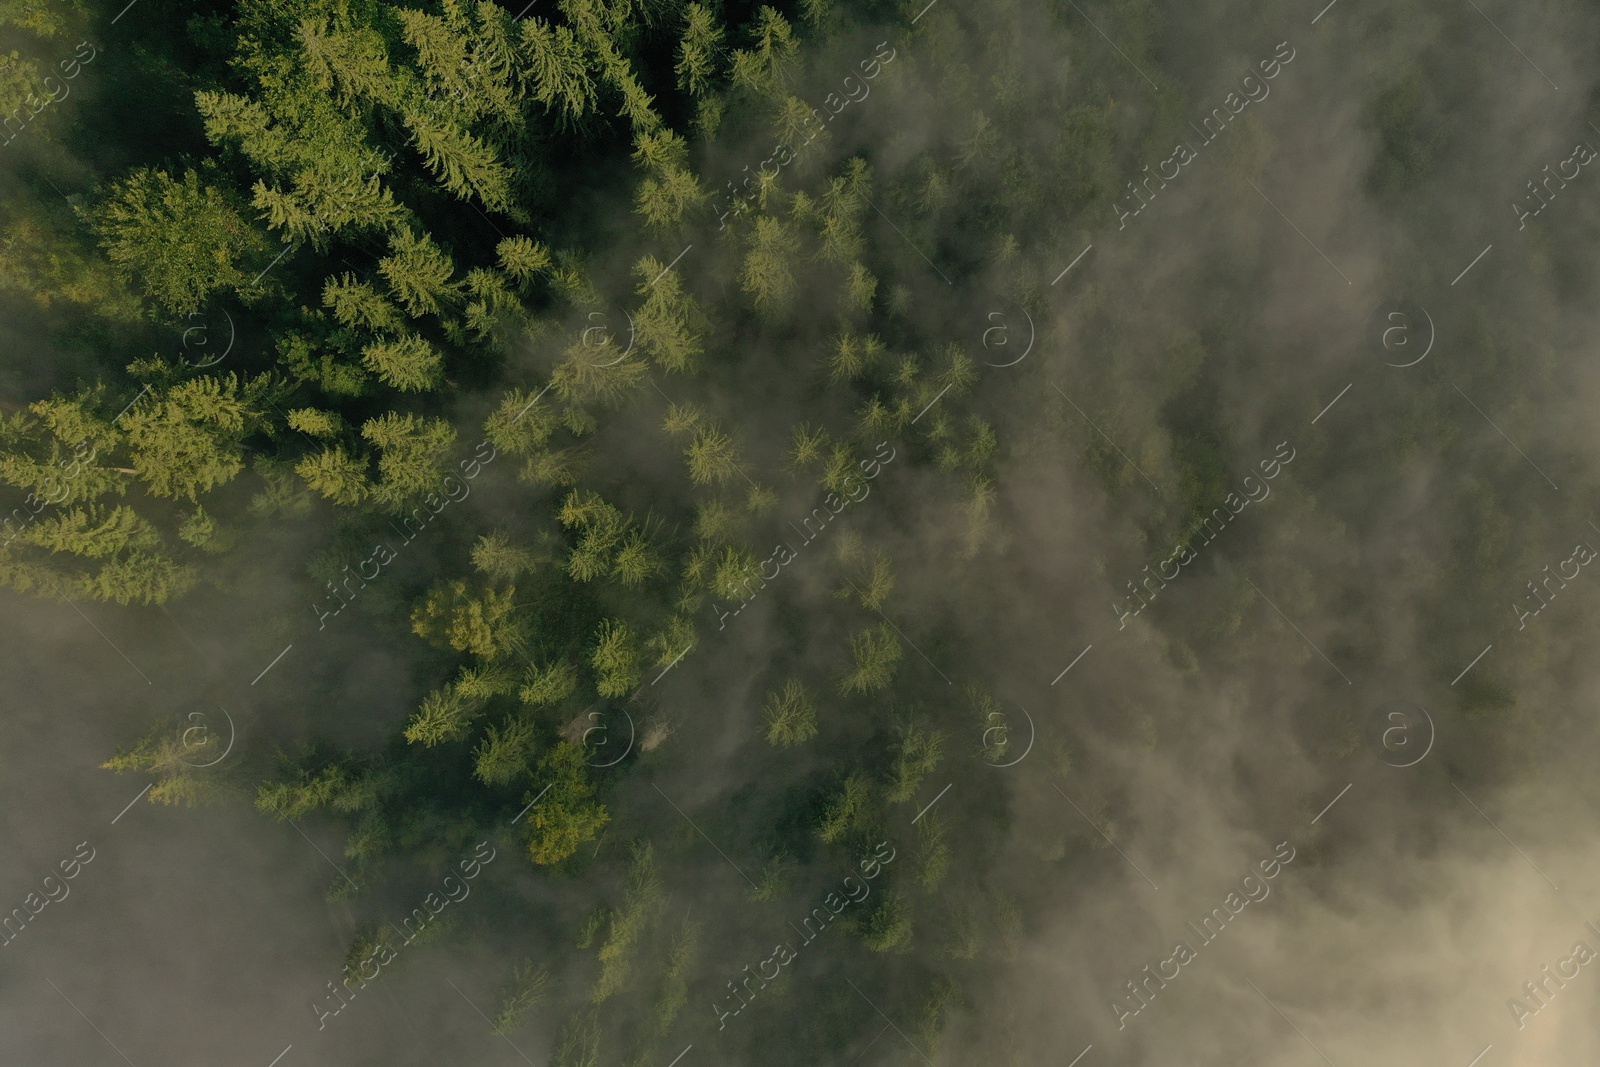 Photo of Aerial view of beautiful forest with conifer trees on foggy morning